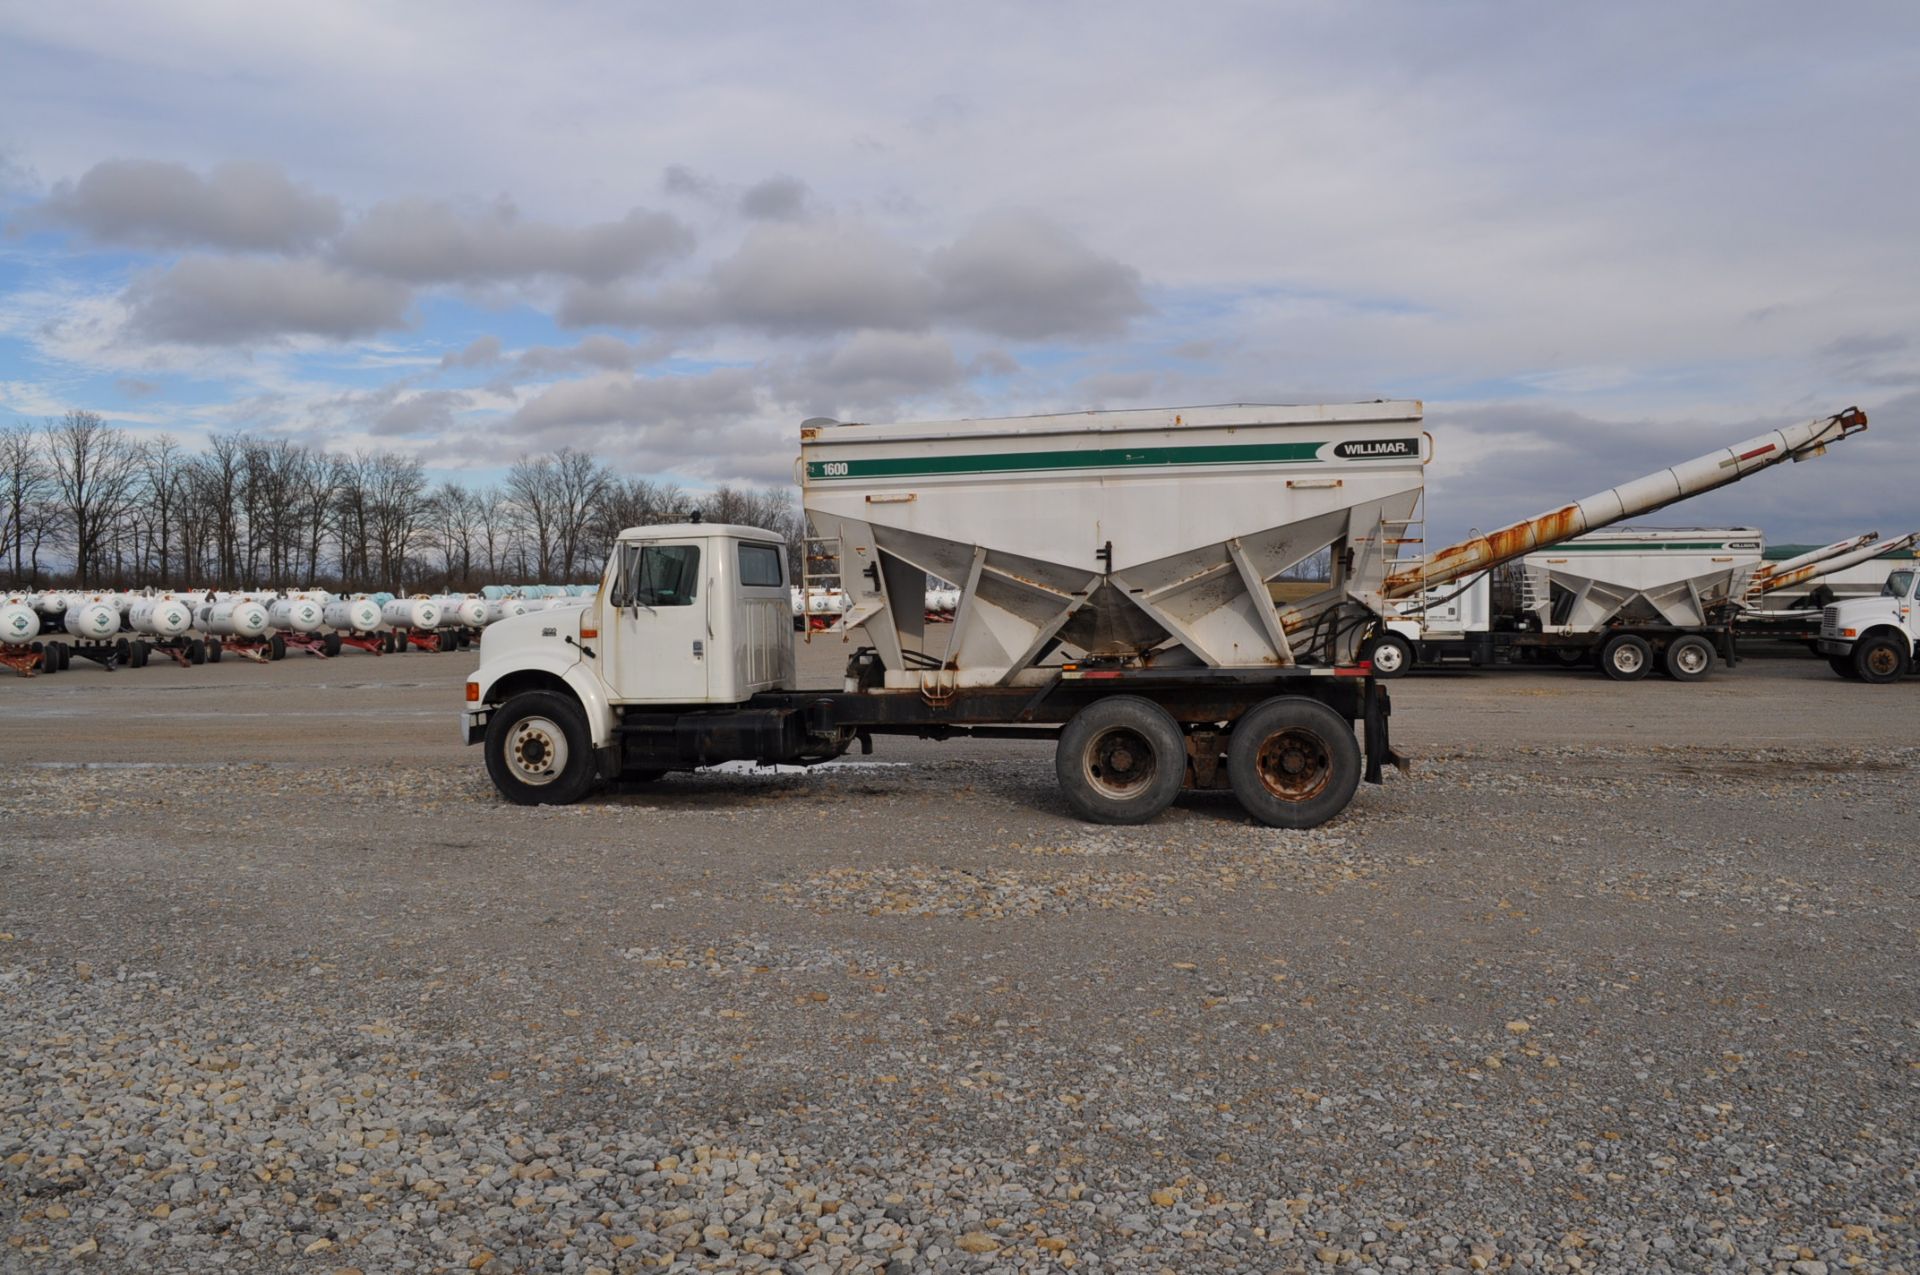 2002 International 4900 w/ Willmar 16-ton bed, rear auger, DT466E engine needs work, 7-speed, PTO - Image 3 of 21